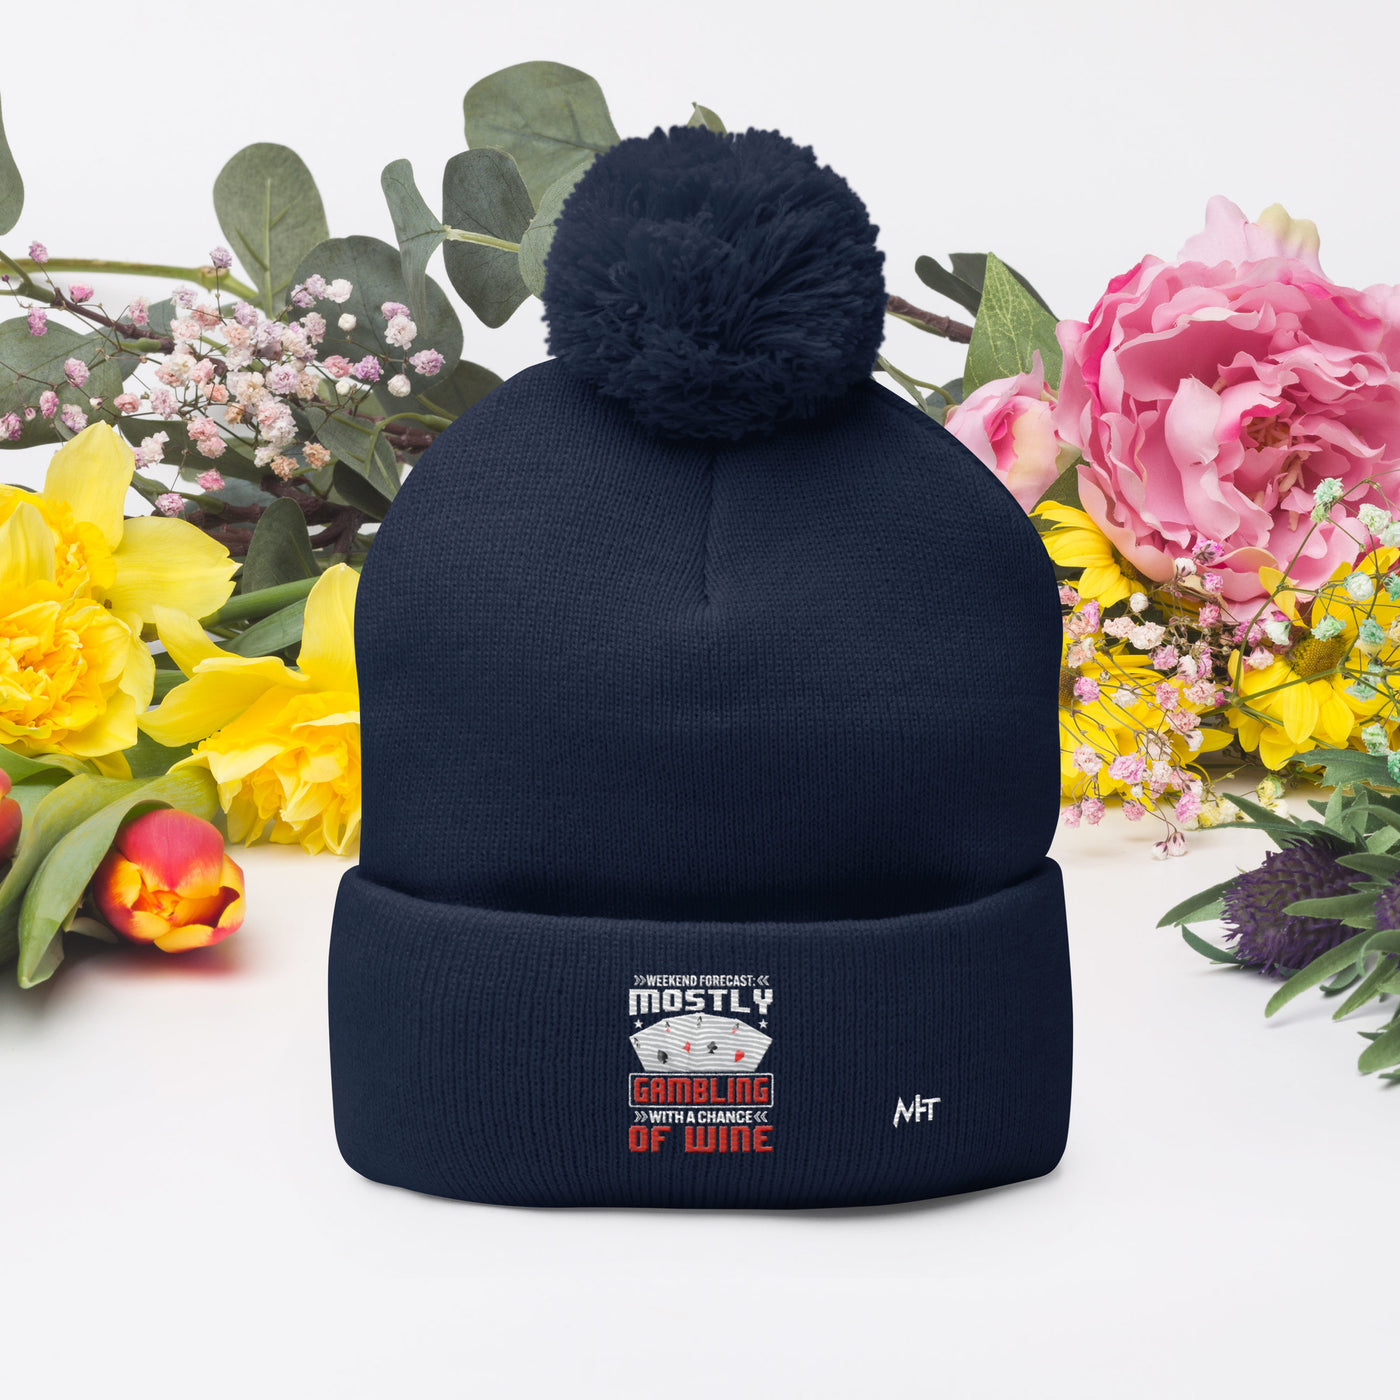 Weekend Forecast Mostly Gambling With a Chance of Wine - Pom-Pom Beanie